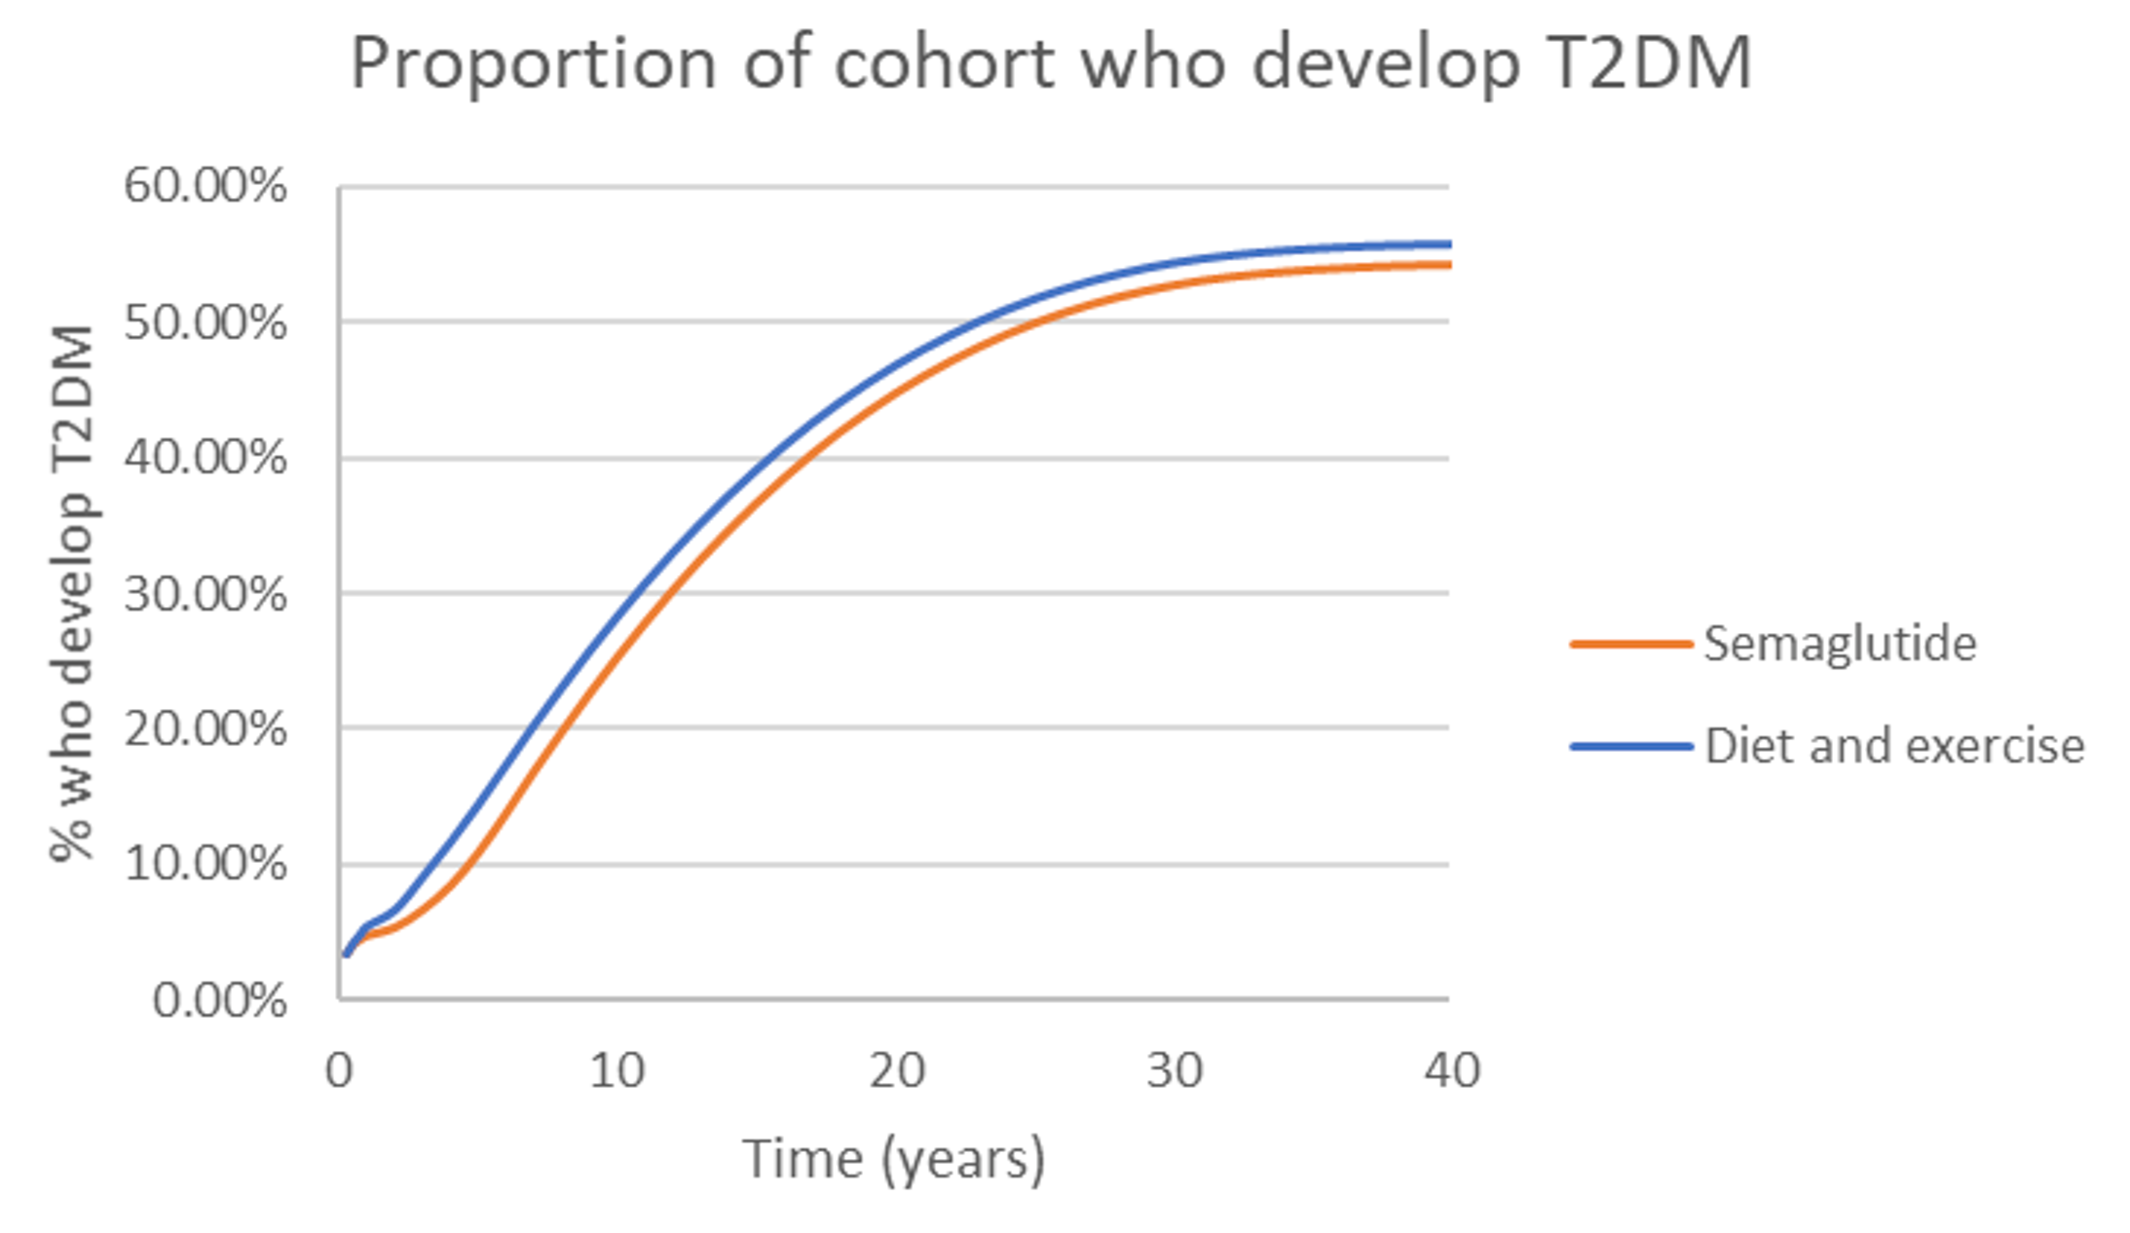 The following figure outlines the proportion of patients who develop type 2 diabetes over time dependent on whether they received semaglutide or diet and exercise alone.